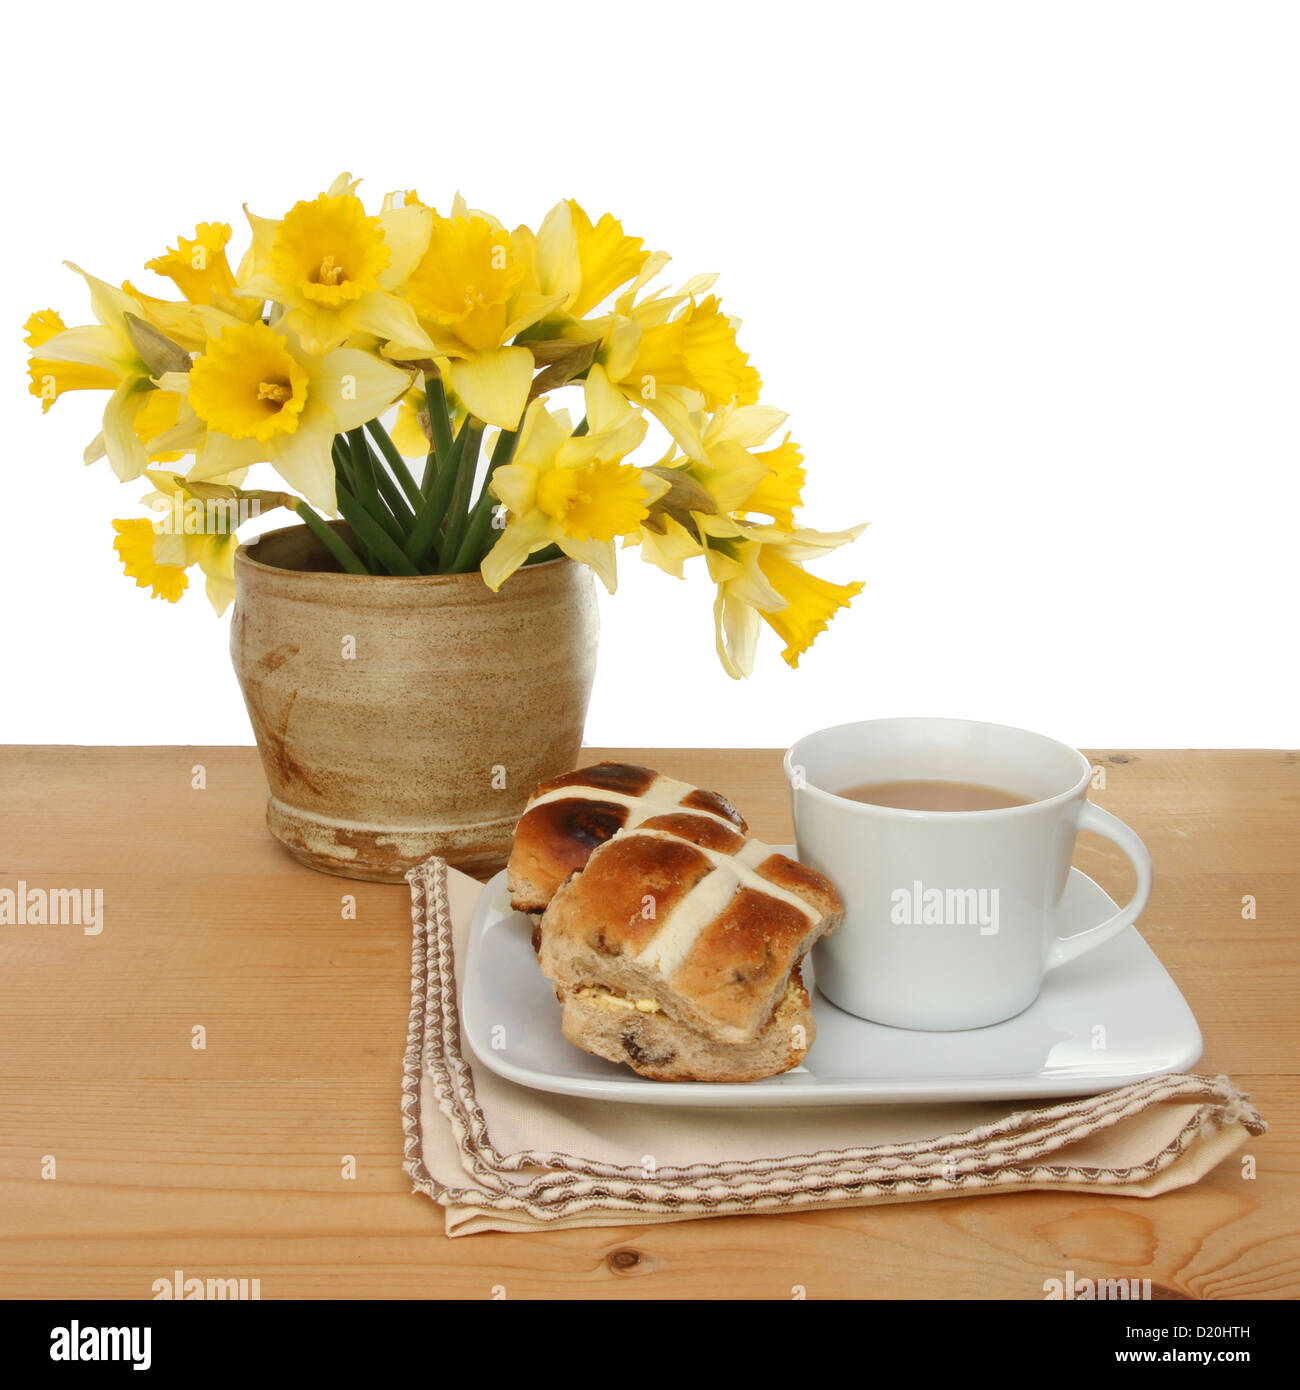 Easter theme, hot cross buns and a cup of tea with daffodil flowers on a table against a white background Stock Photo